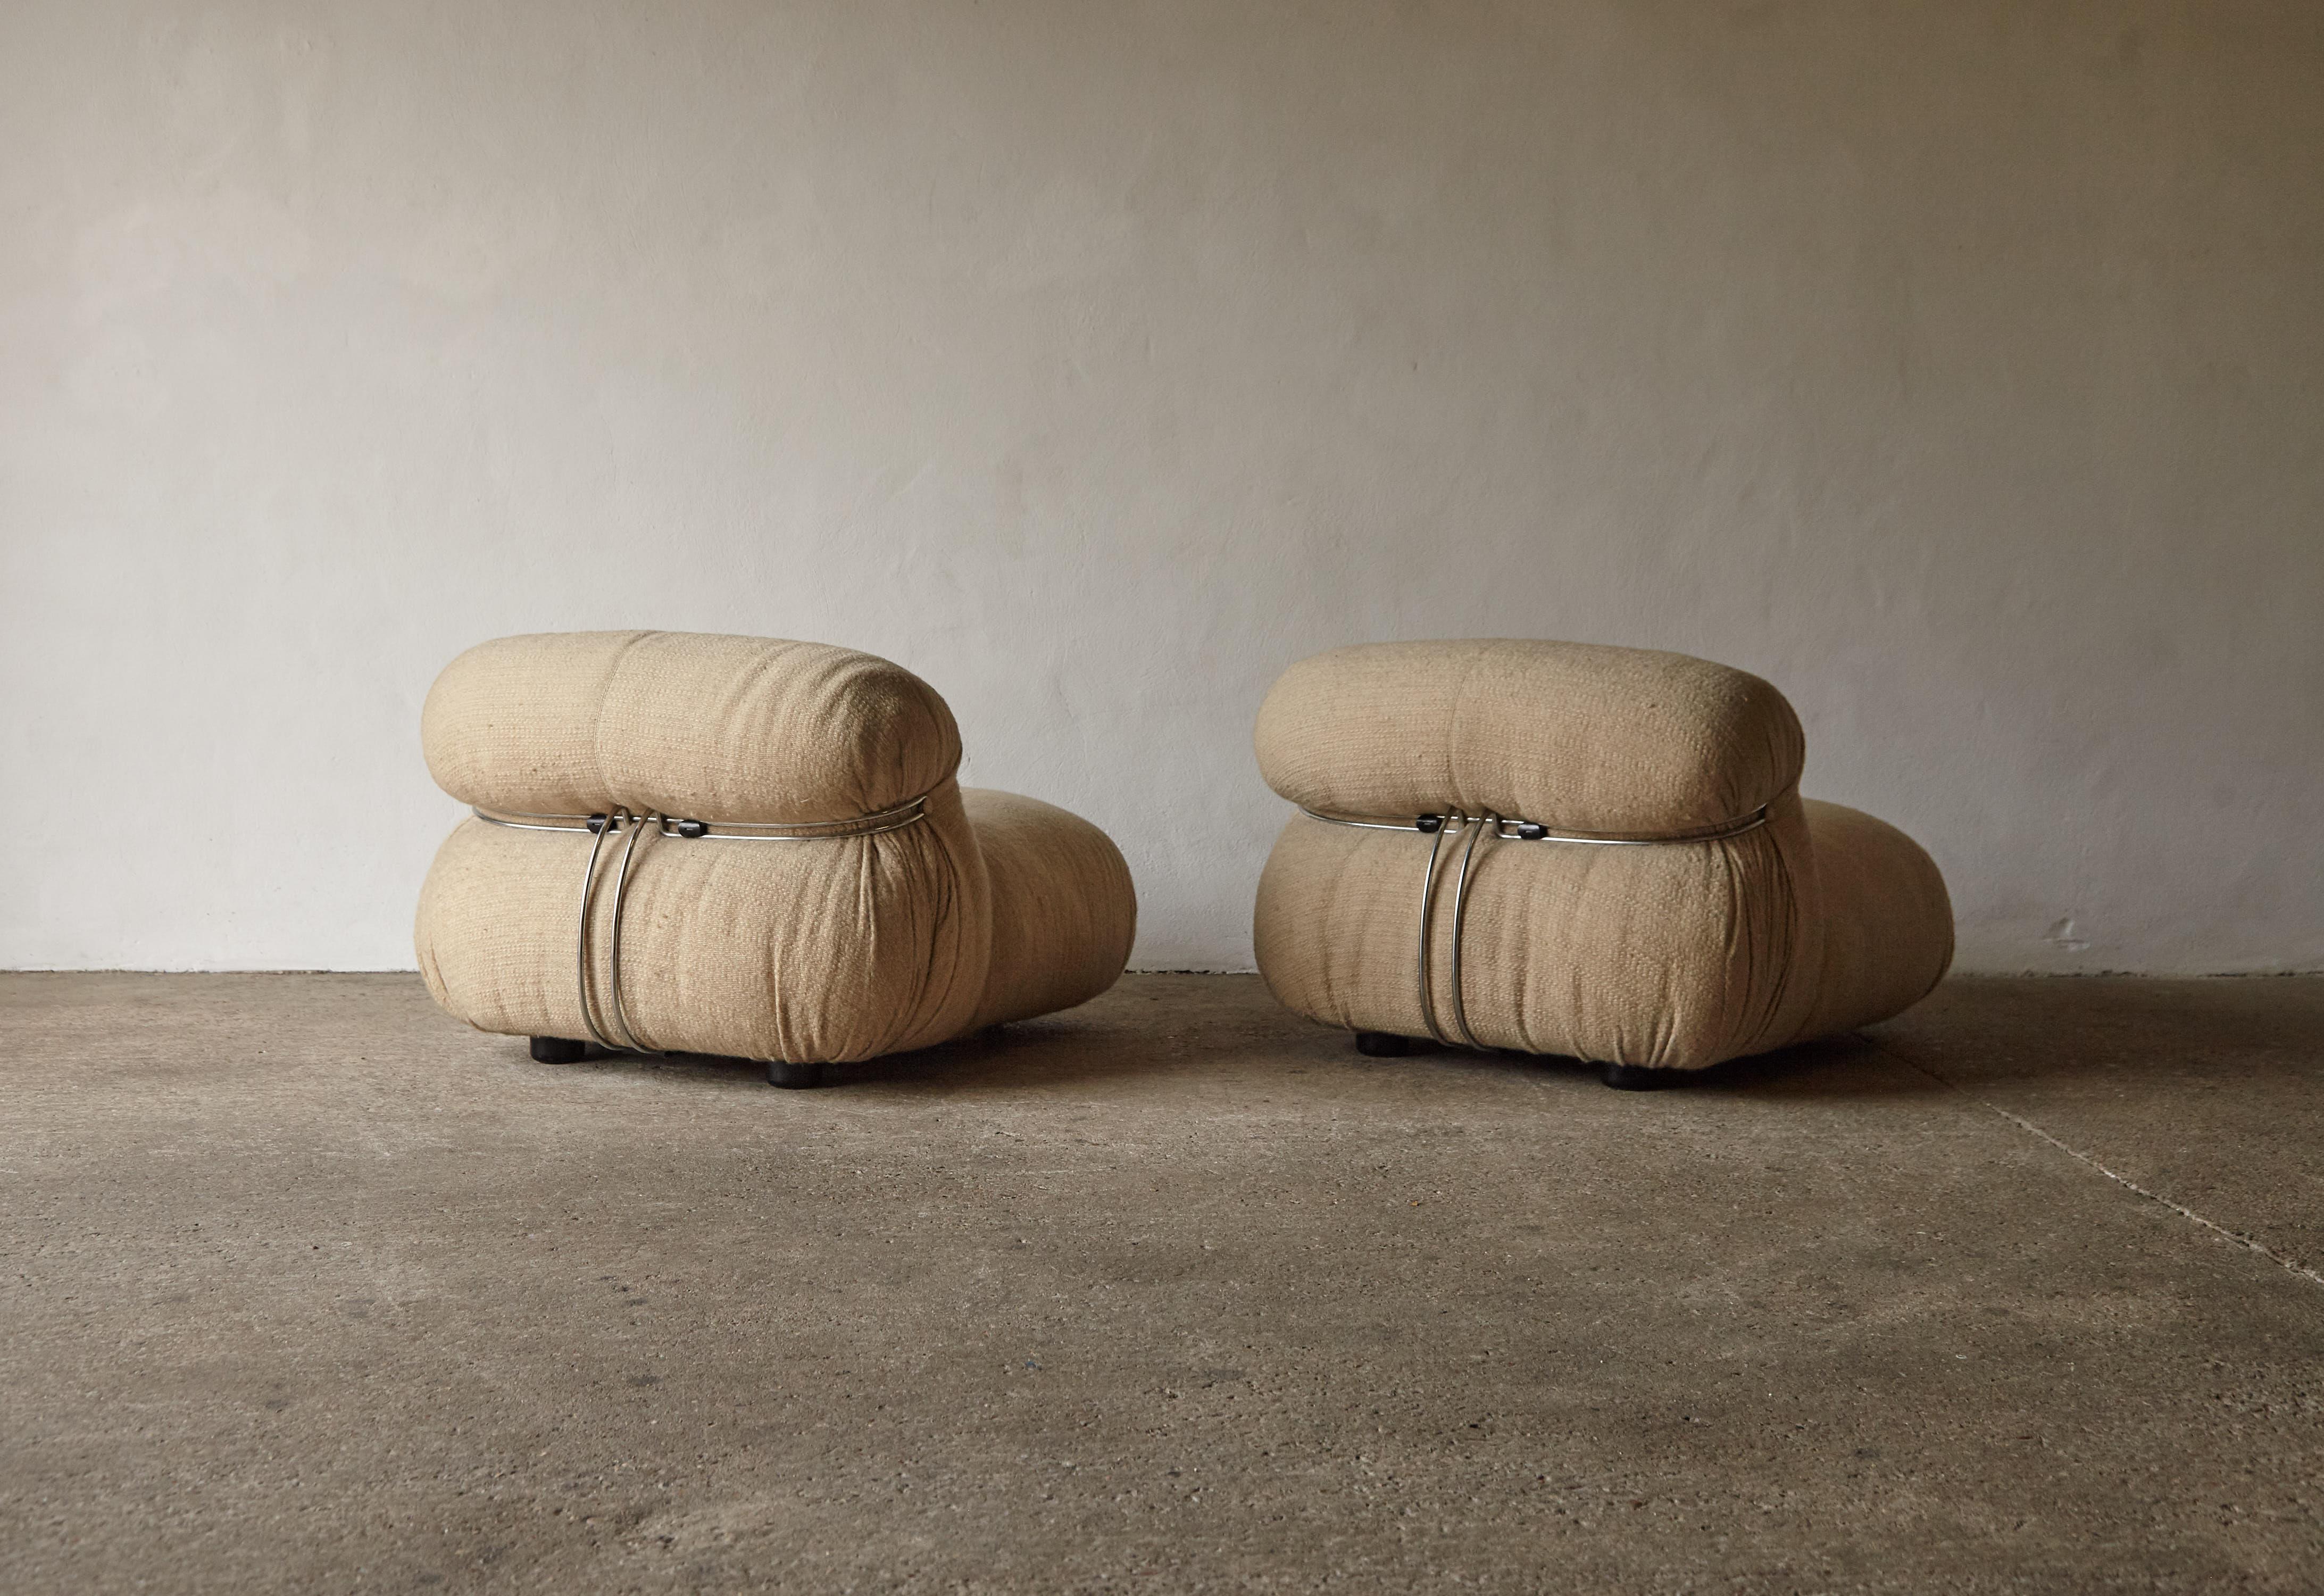 20th Century Soriana Chairs by Afra & Tobia Scarpa for Cassina, Original Fabric, Italy, 1970s For Sale